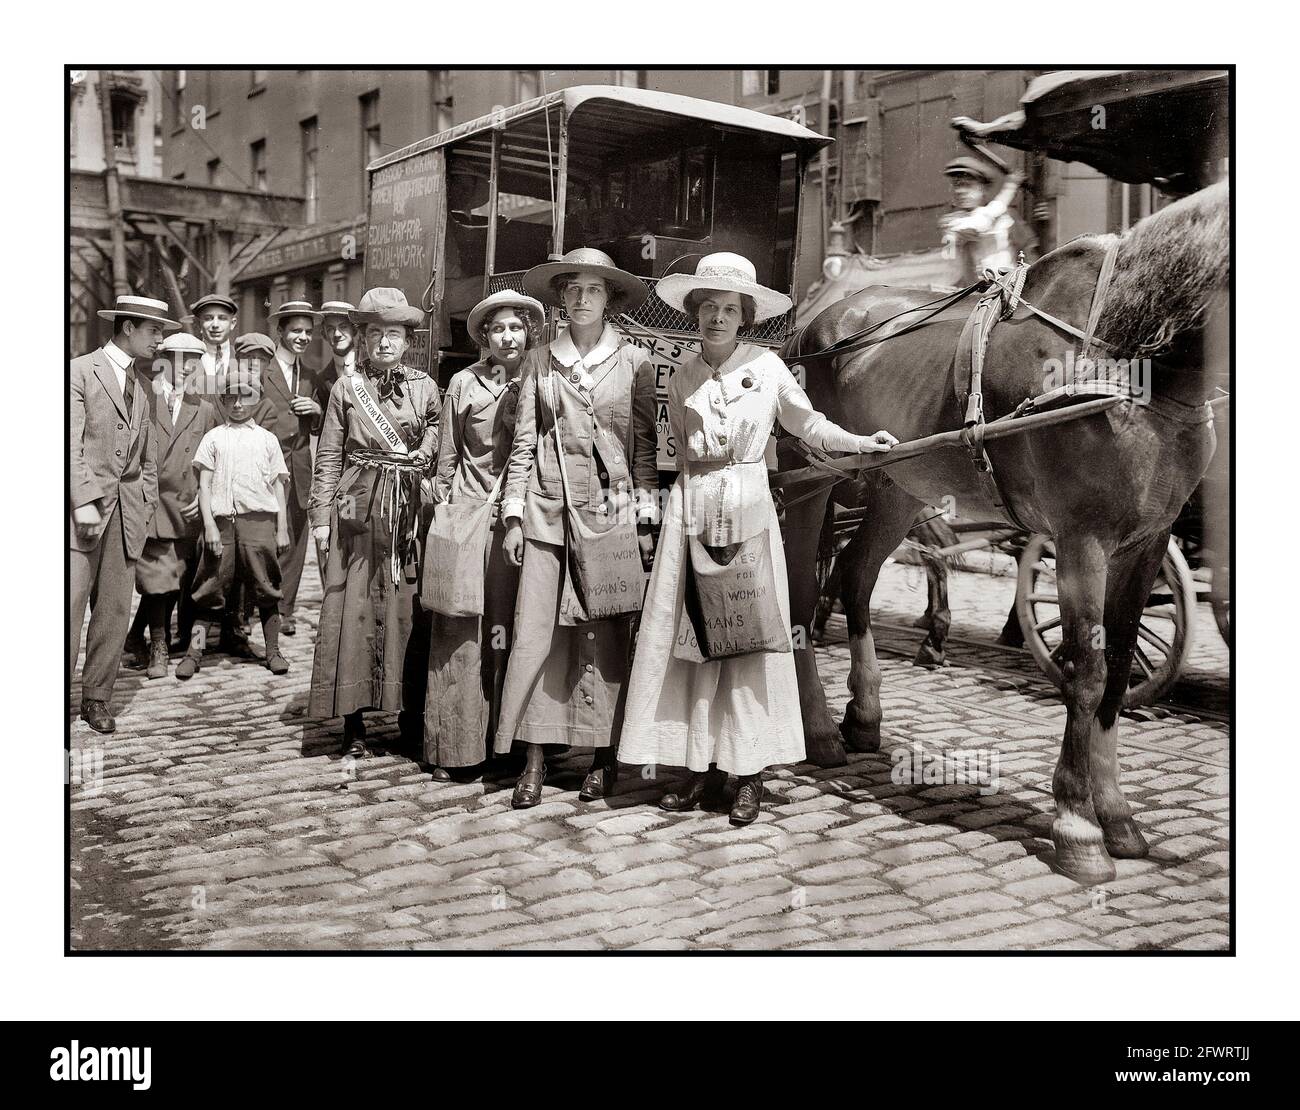 American Suffragettes 1910 (left to right) suffragists Ida Craft, Elsie McKenzie, Vera Wentworth and Elisabeth Freeman (1876-1942).  Women selling the  Womens Journal for 5 cents in support for votes for women from a horse and wagon transportation Suffrage Suffragettes America USA Stock Photo